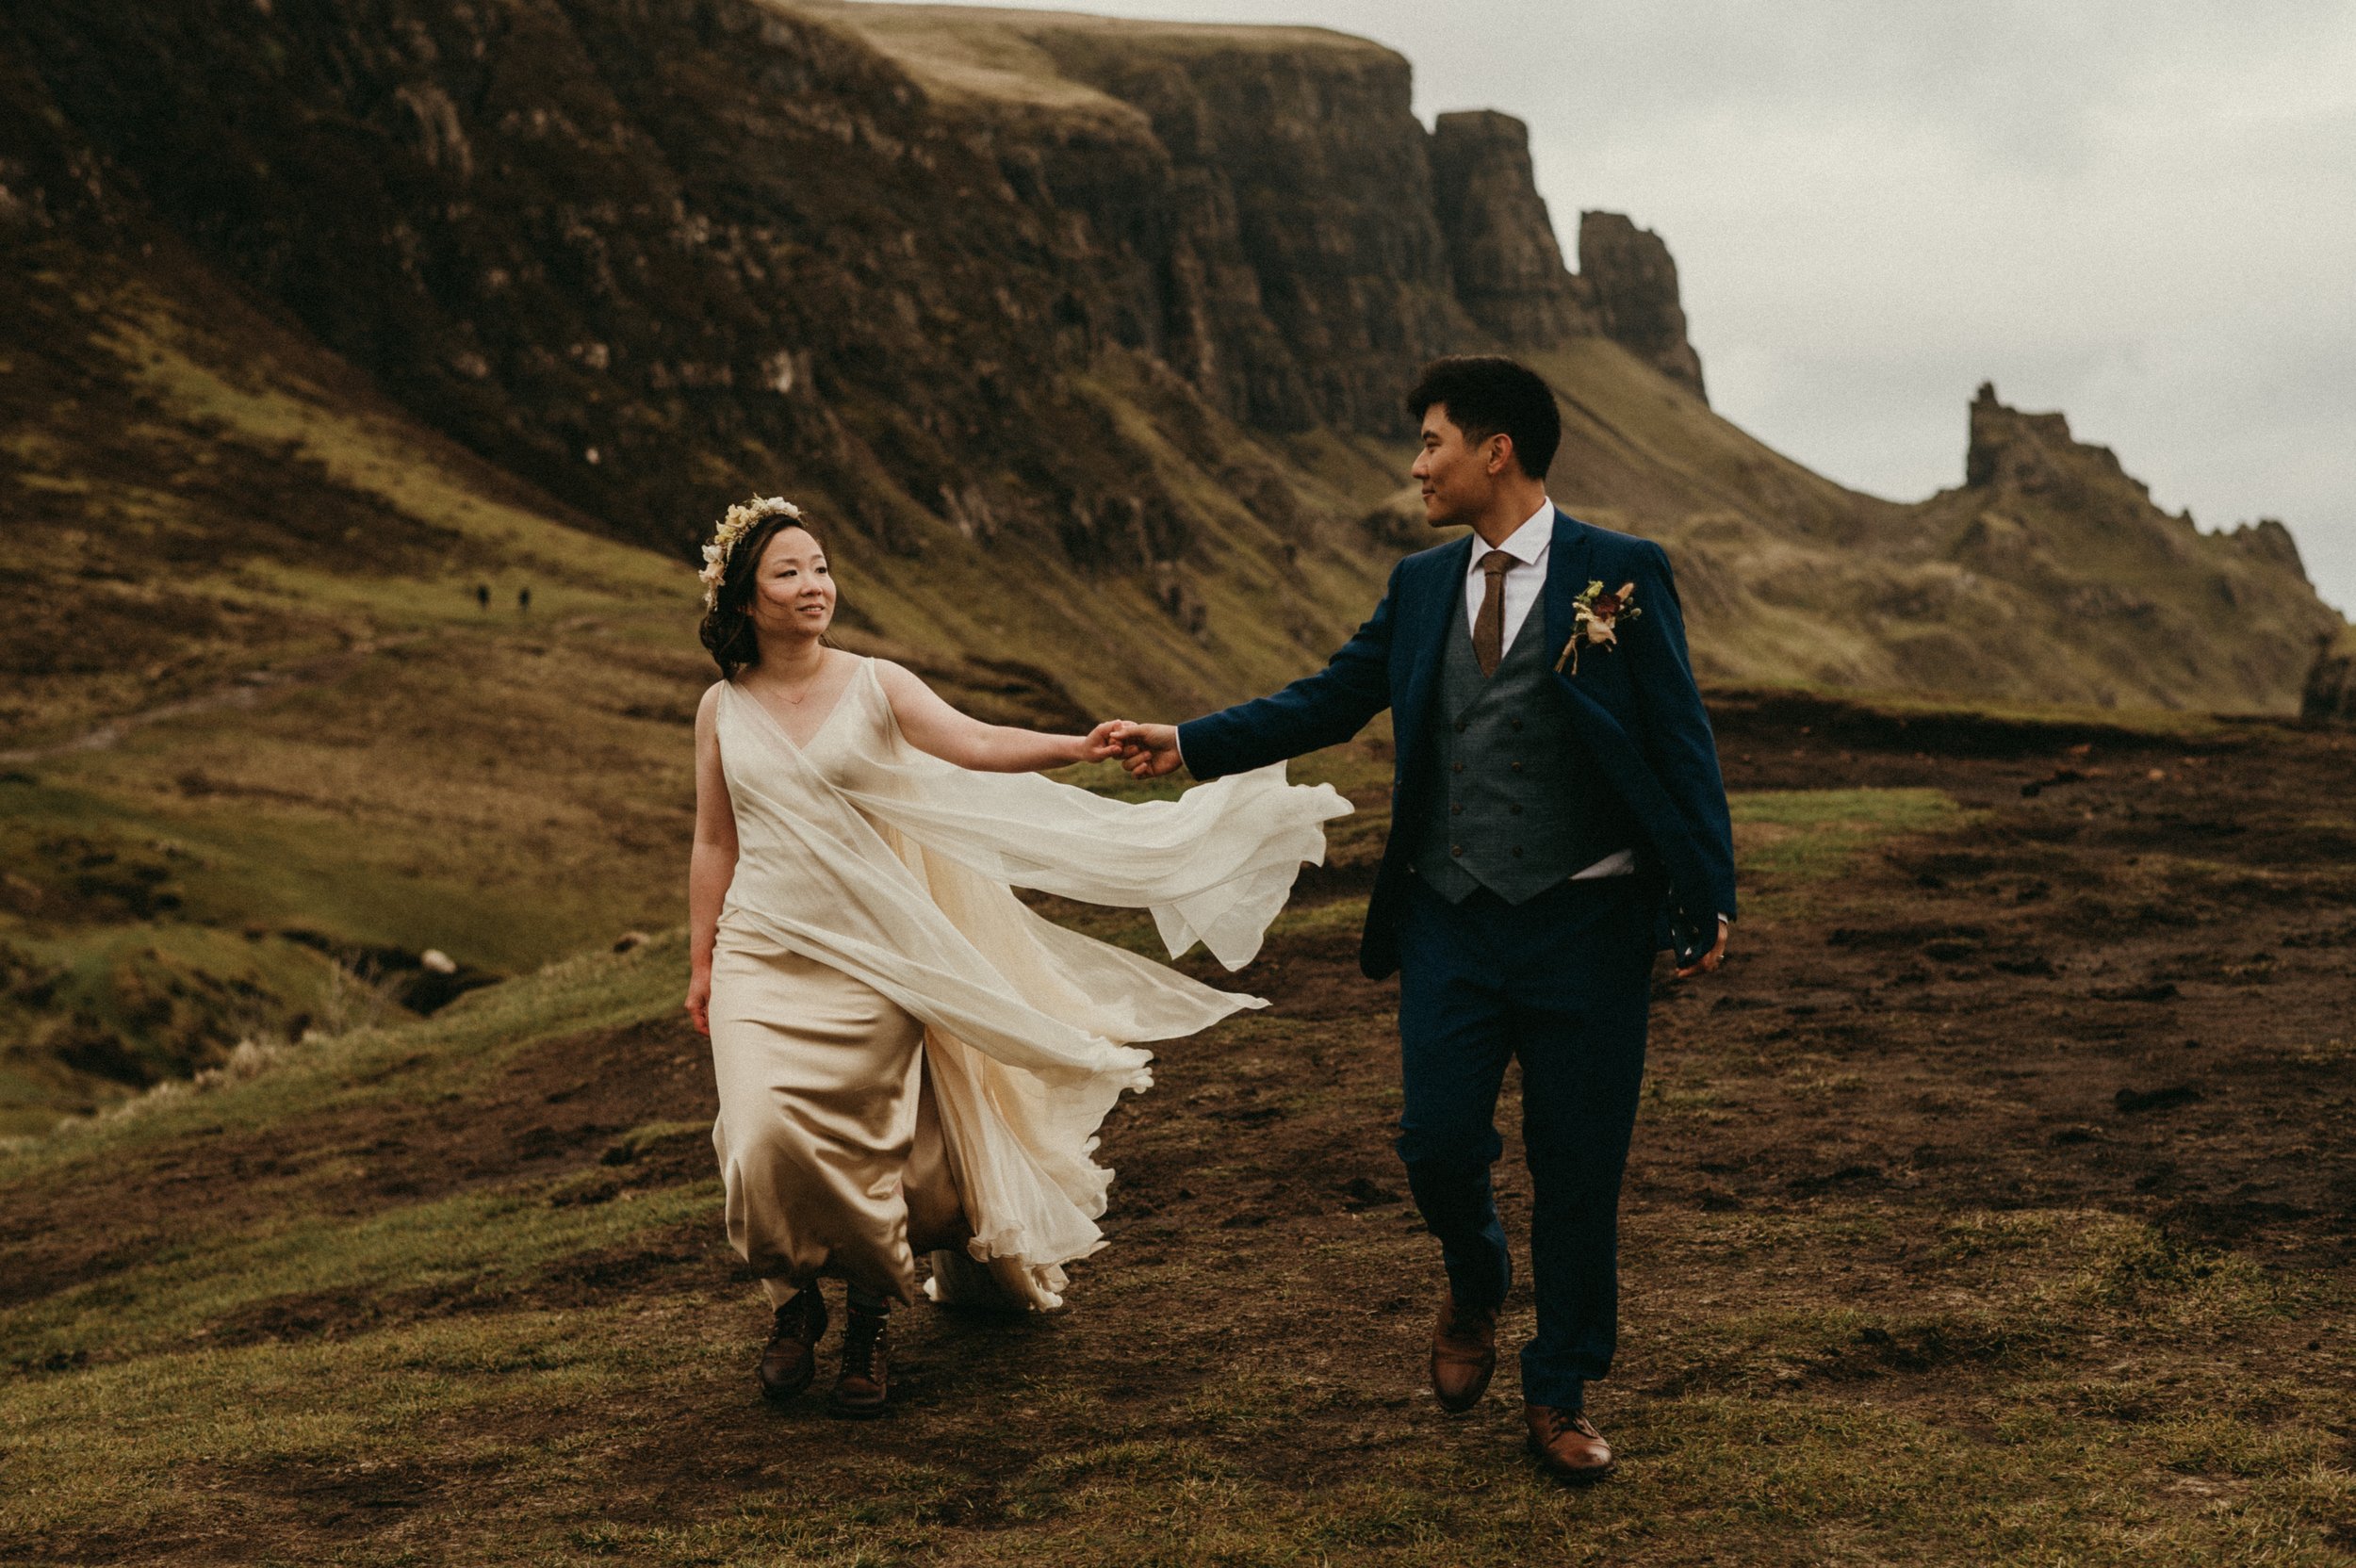   Leah wedding dress . Bride Angela’s elopement in Scotland. Photo by  Andrew Rae Photography.  